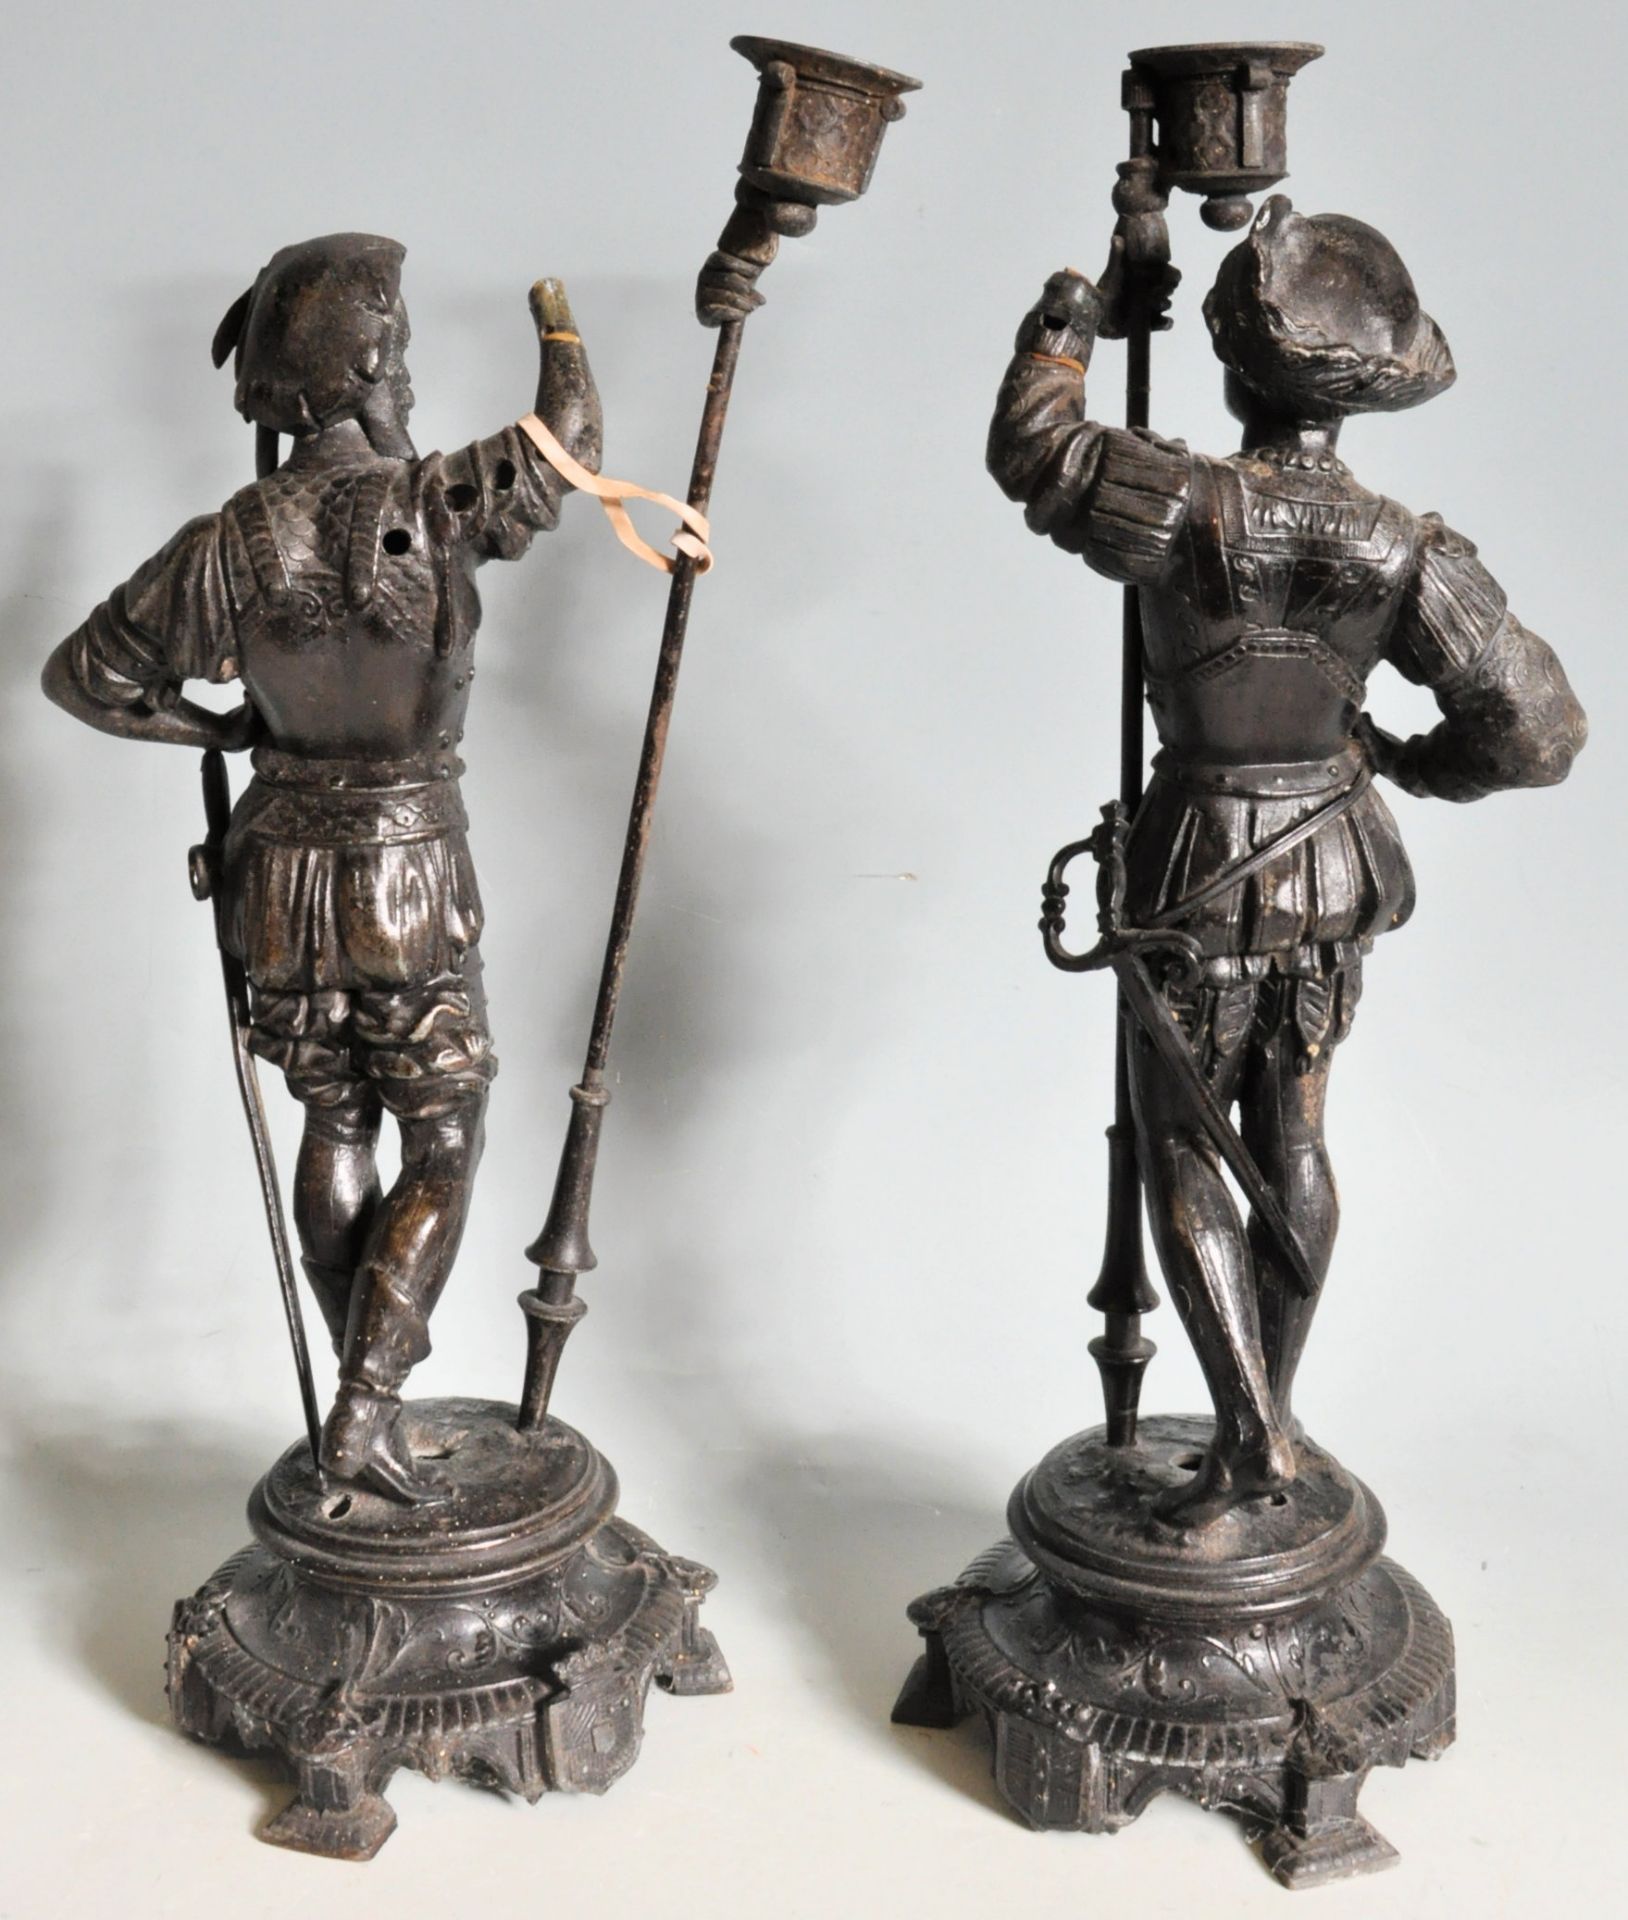 PAIR OF EARLY 20TH CENTURY SPELTER FIGURINES - Image 5 of 9